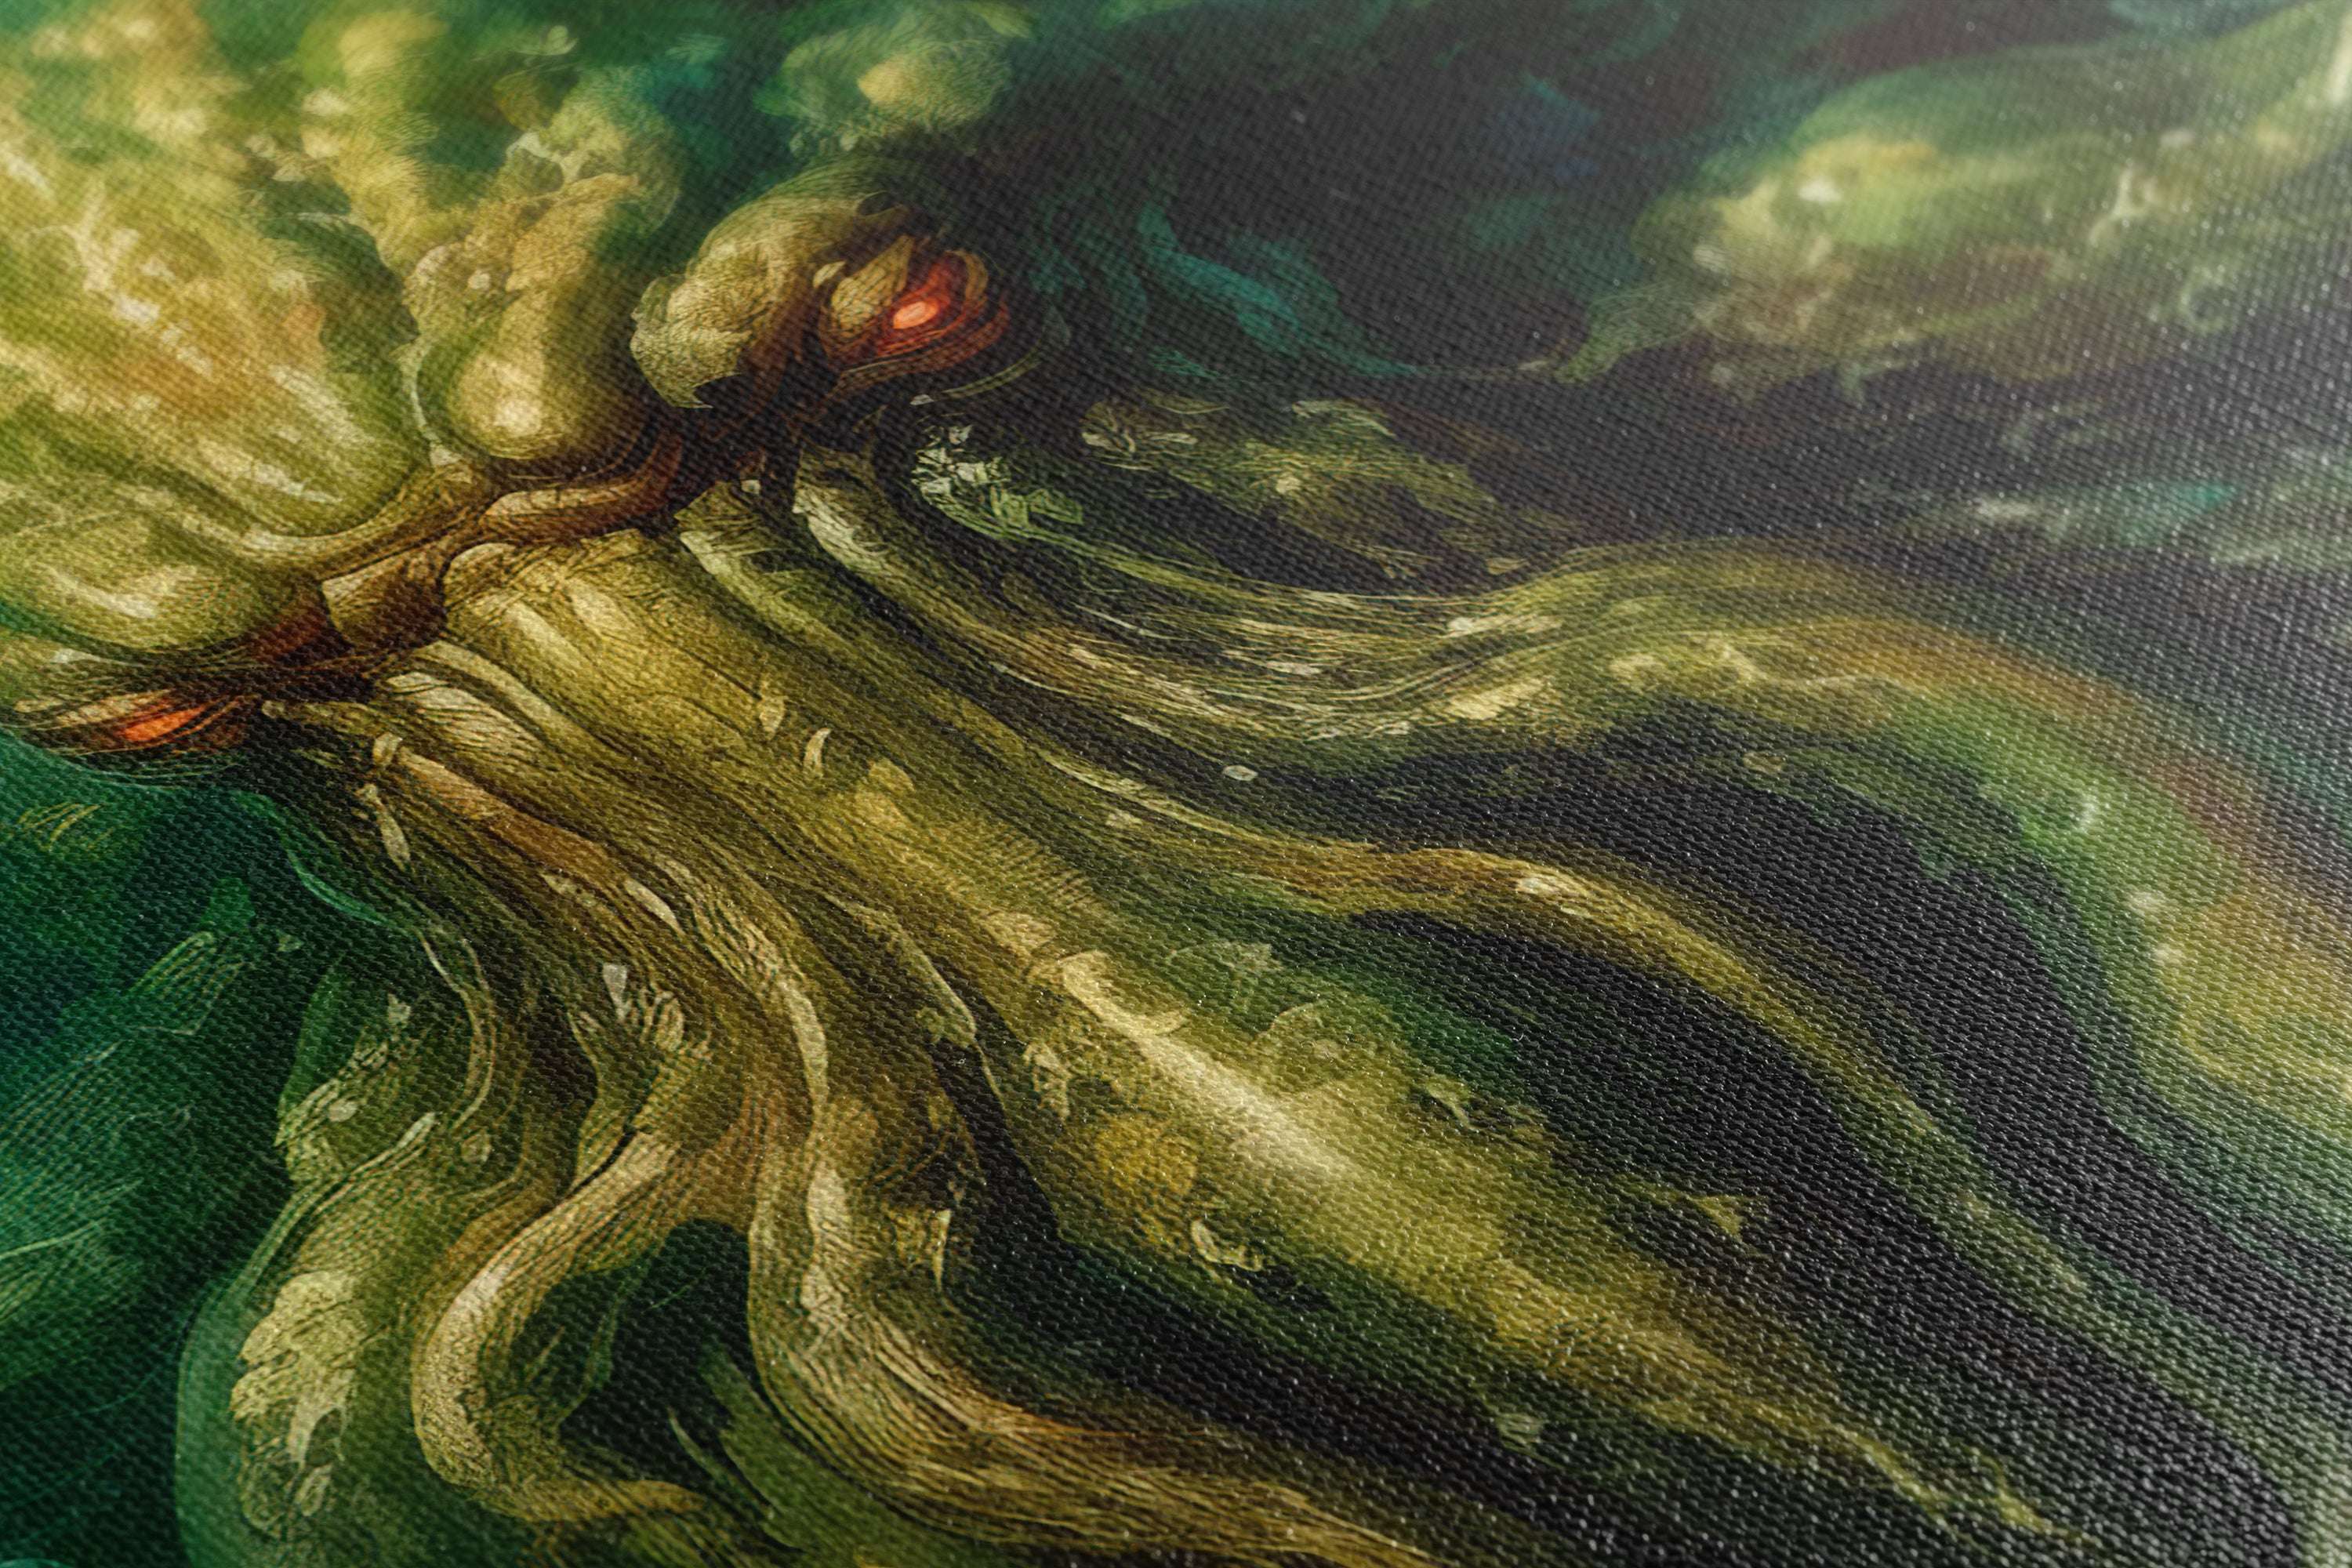 Ominous Green Amber Vision of Lovecraft’s Cthulhu - Canvas Print - Artoholica Ready to Hang Canvas Print